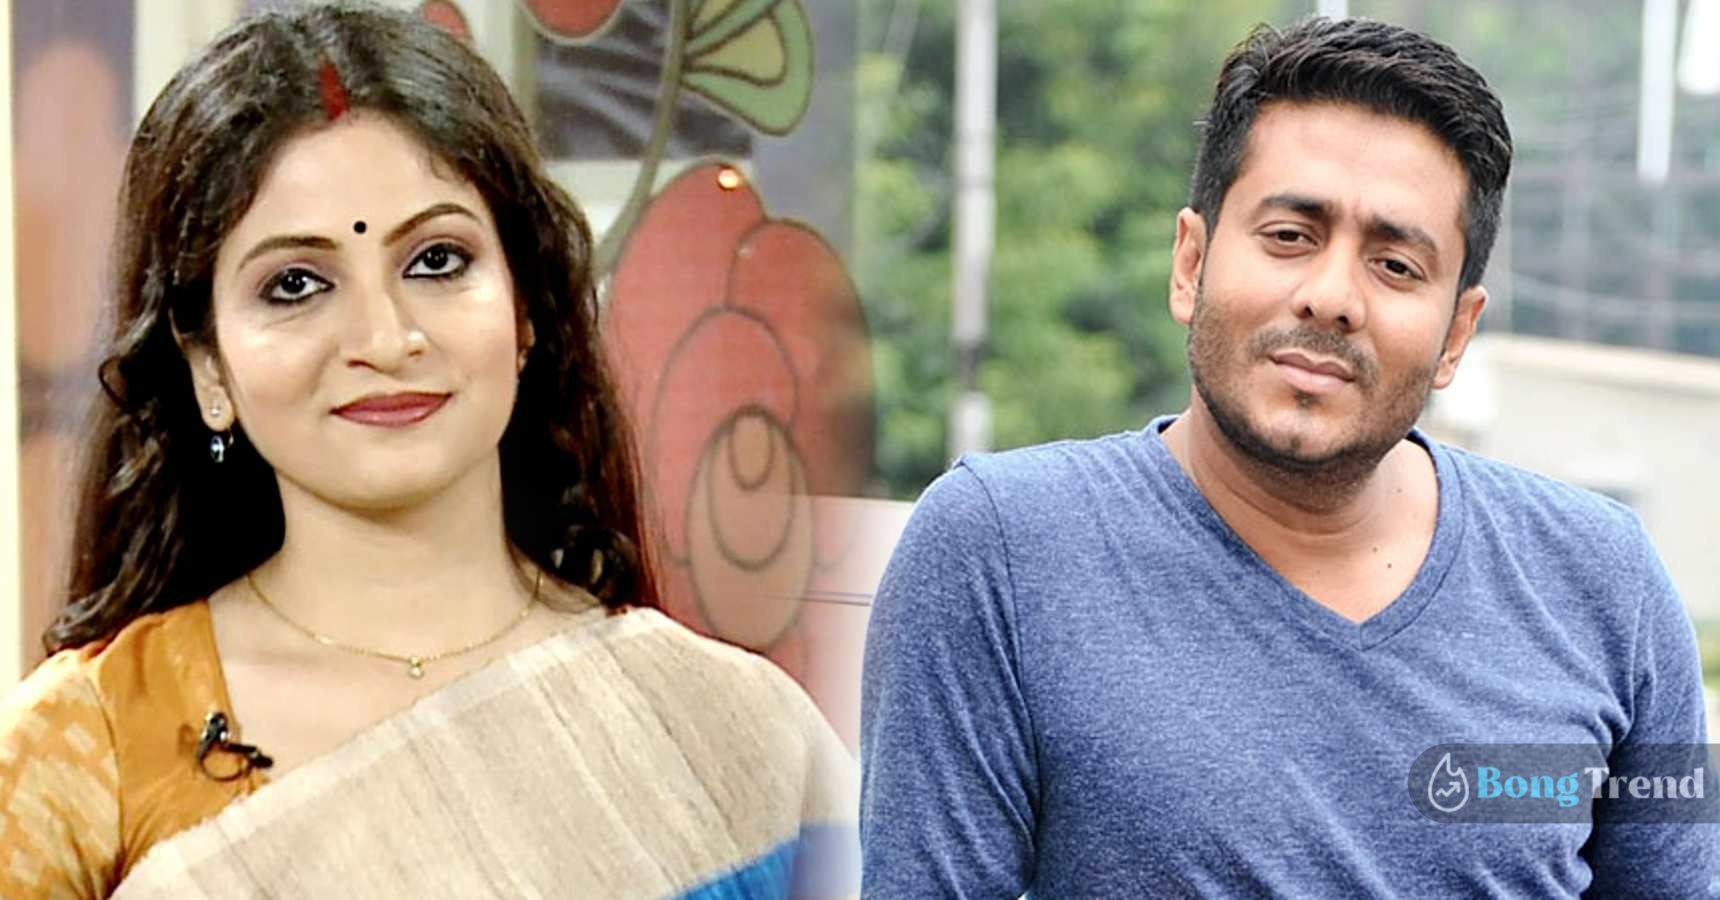 Soumili Biswas left Raj Chakraborty Serial Godhuli Alap after repeatedly changing characters